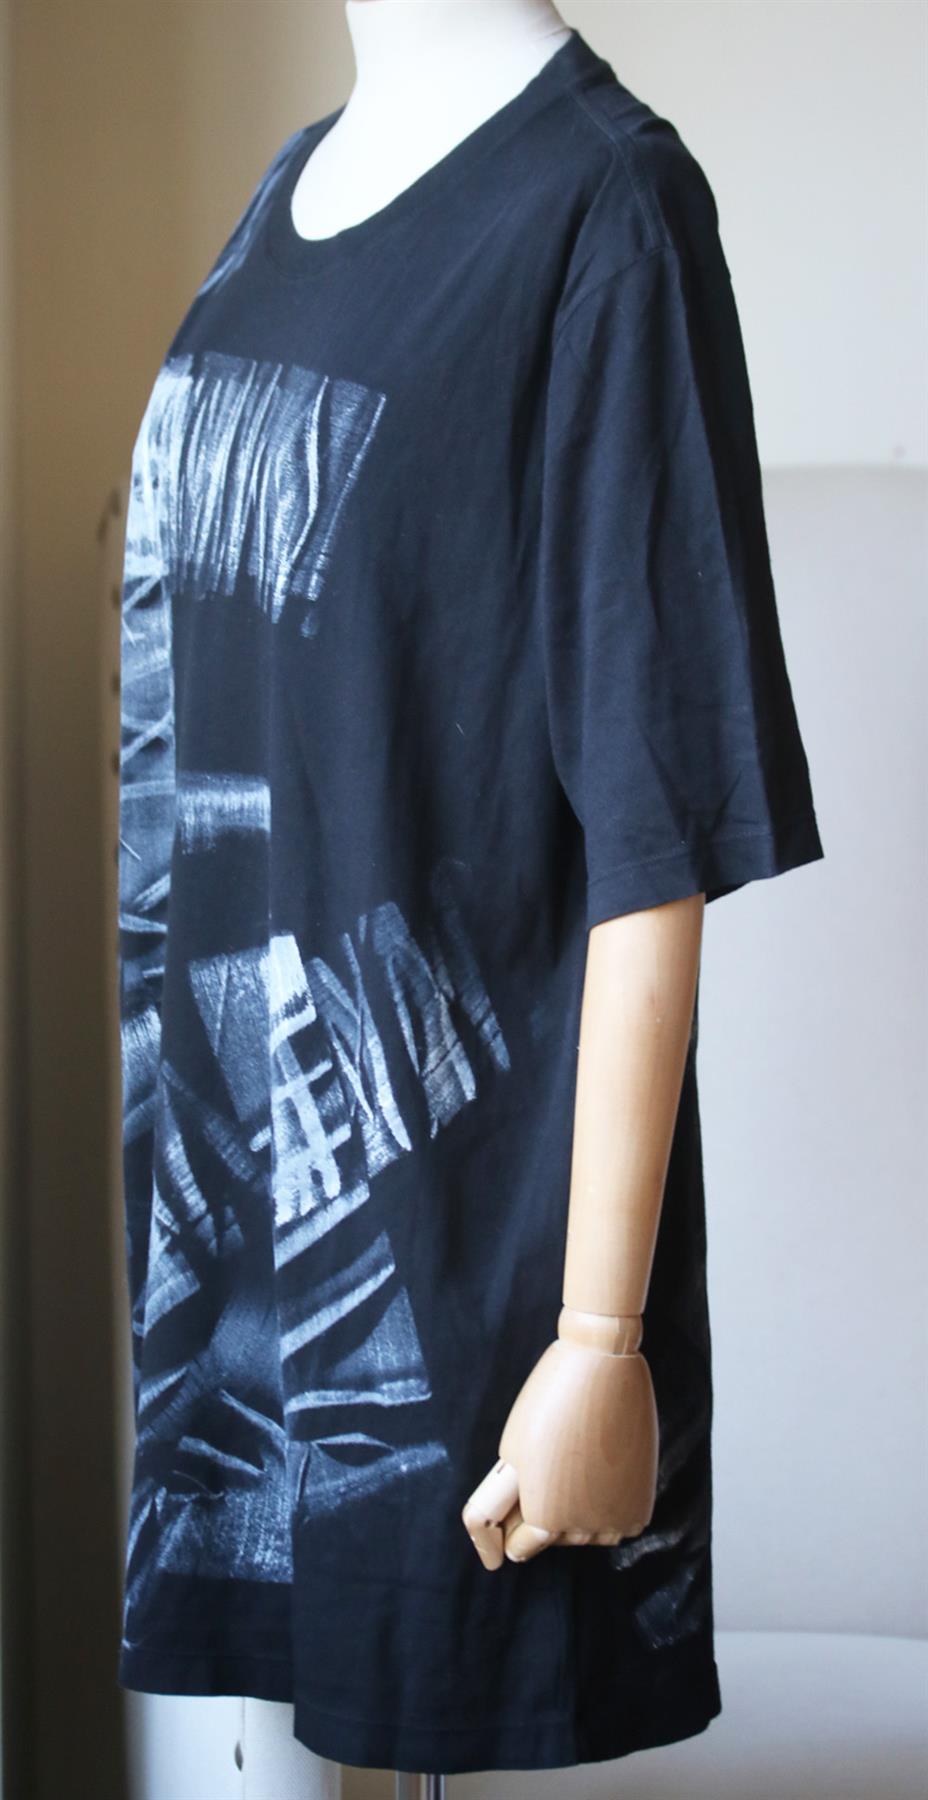 FAITH CONNEXION OVERSIZED PRINTED COTTON JERSEY T-SHIRT SMALL